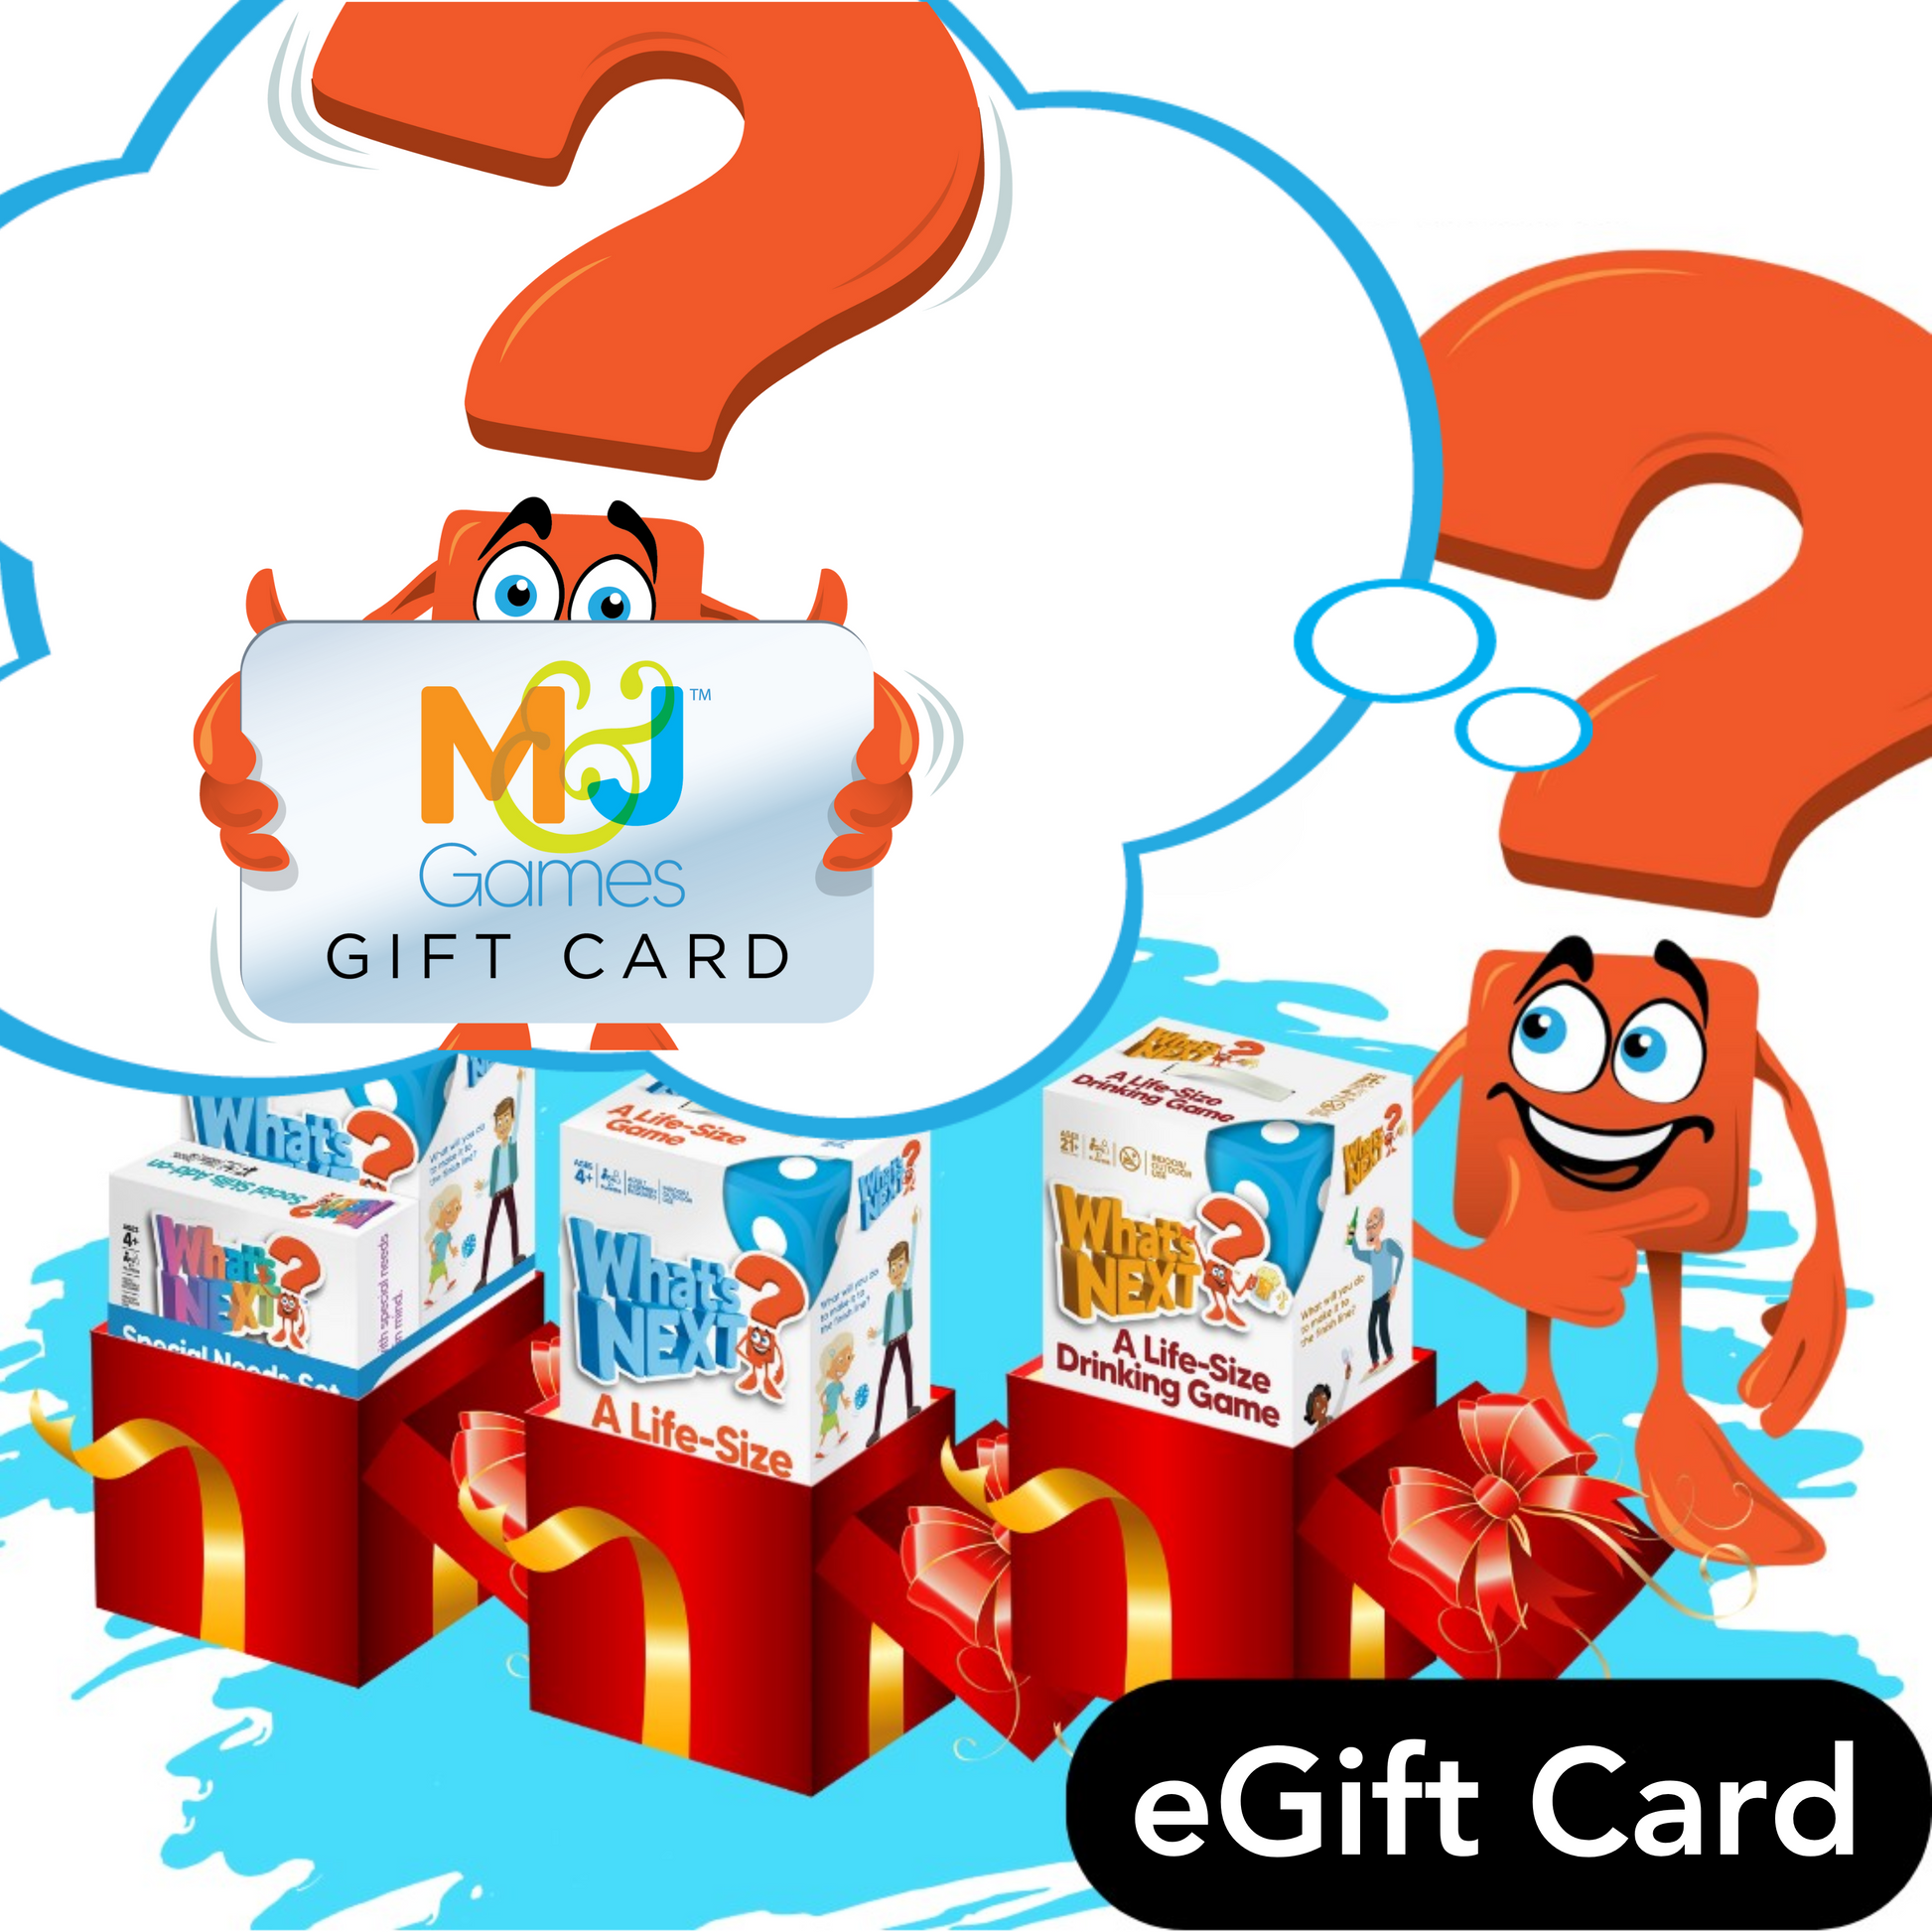 Your Family Adventure Awaits with a What's Next? Games eGift Card! - M&J Games, LLC